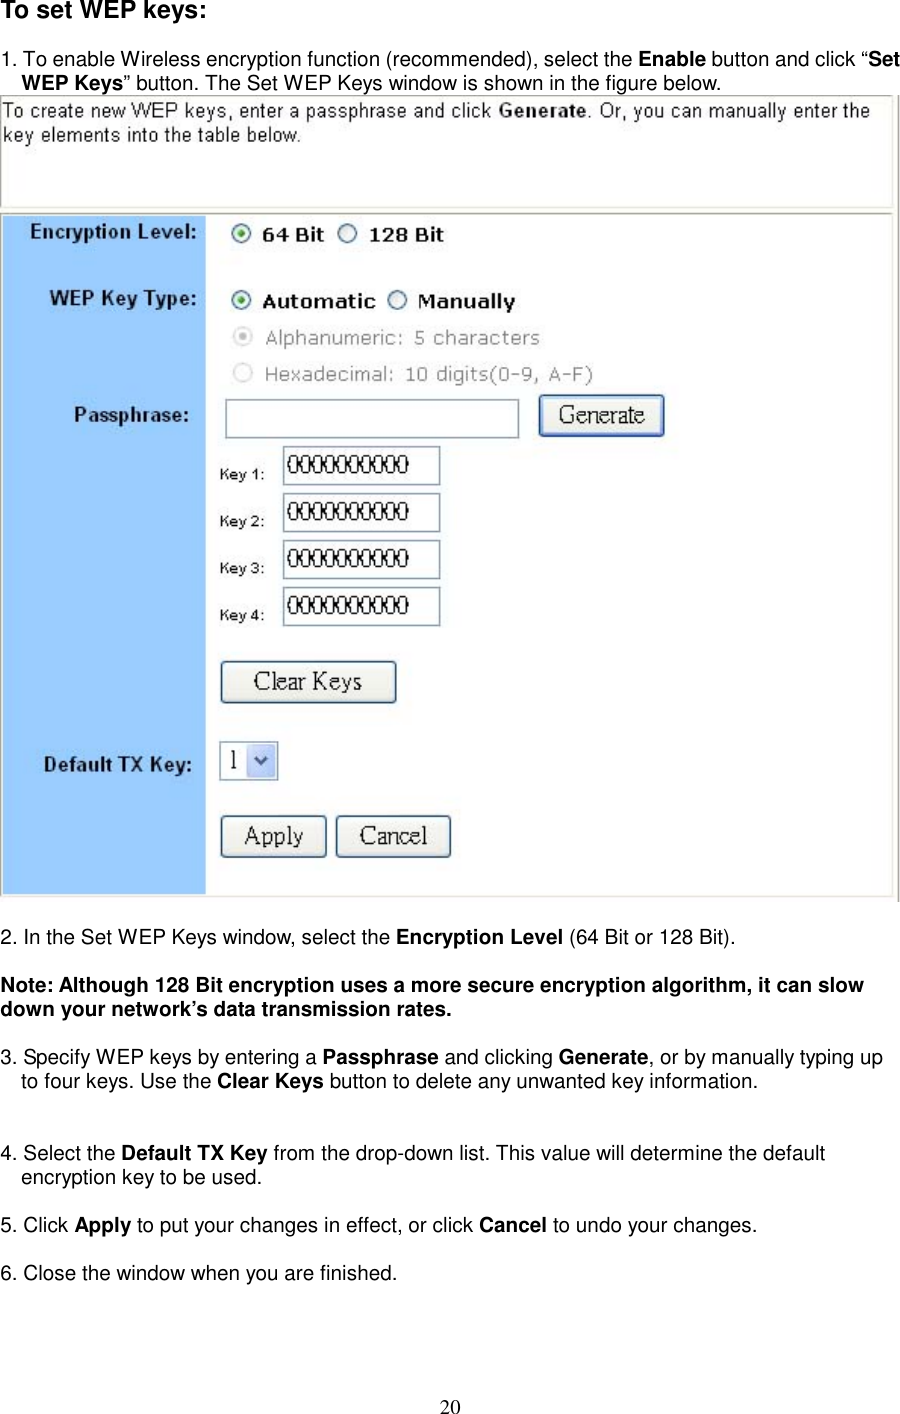  20To set WEP keys:  1. To enable Wireless encryption function (recommended), select the Enable button and click “Set WEP Keys” button. The Set WEP Keys window is shown in the figure below.    2. In the Set WEP Keys window, select the Encryption Level (64 Bit or 128 Bit).    Note: Although 128 Bit encryption uses a more secure encryption algorithm, it can slow down your network’s data transmission rates.  3. Specify WEP keys by entering a Passphrase and clicking Generate, or by manually typing up to four keys. Use the Clear Keys button to delete any unwanted key information.     4. Select the Default TX Key from the drop-down list. This value will determine the default encryption key to be used.  5. Click Apply to put your changes in effect, or click Cancel to undo your changes.    6. Close the window when you are finished.   